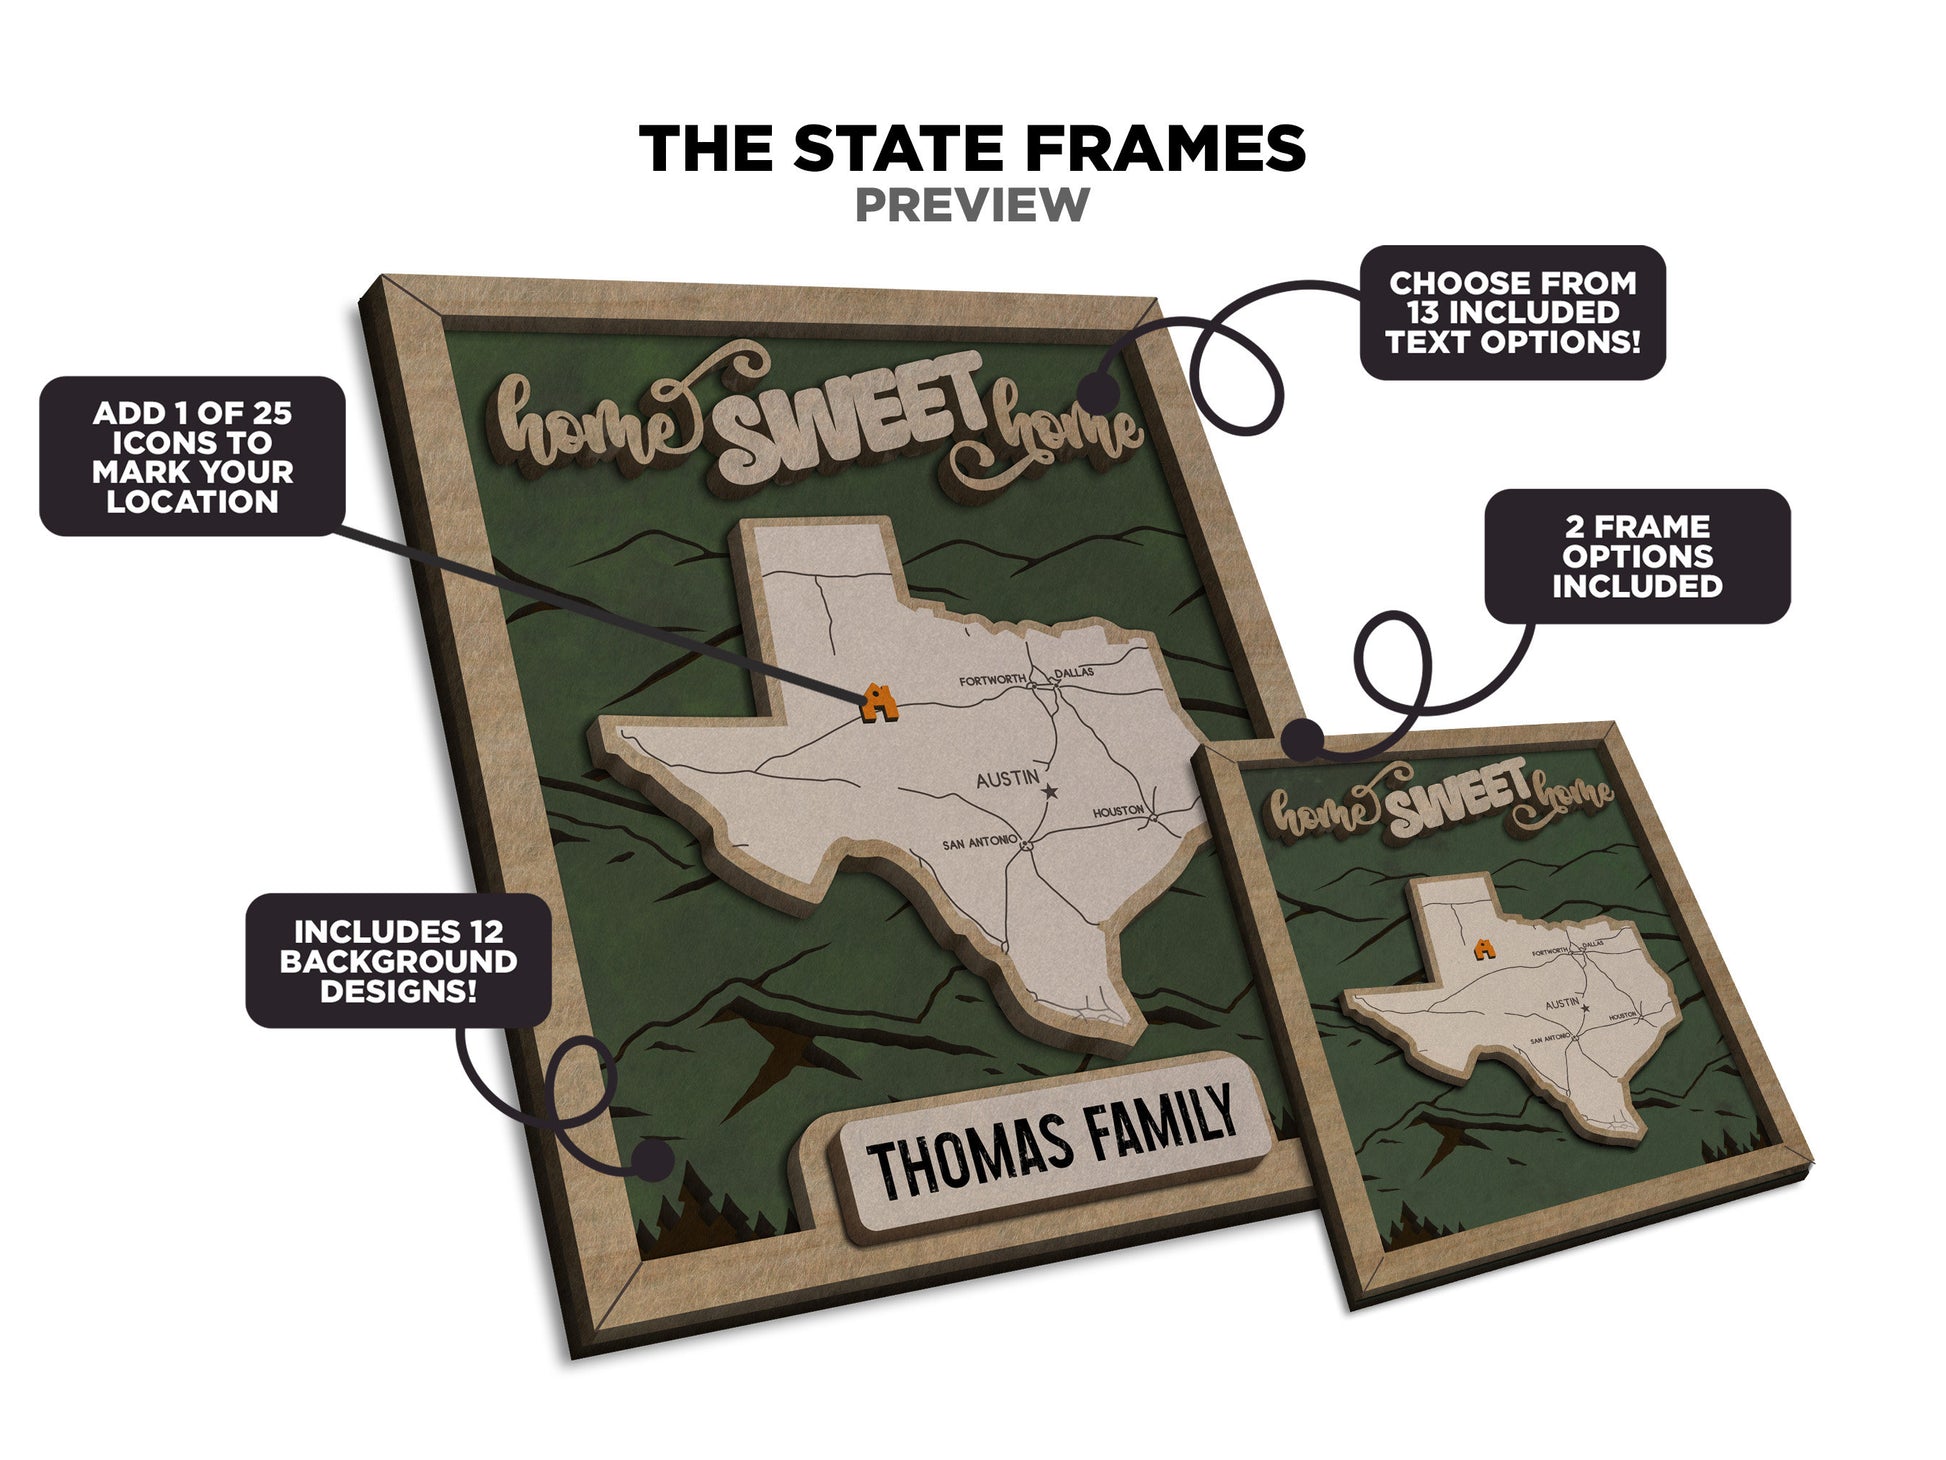 The New York State Frame - 13 text options, 12 backgrounds, 25 icons Included - Make over 7,500 designs - Glowforge & Lightburn Tested